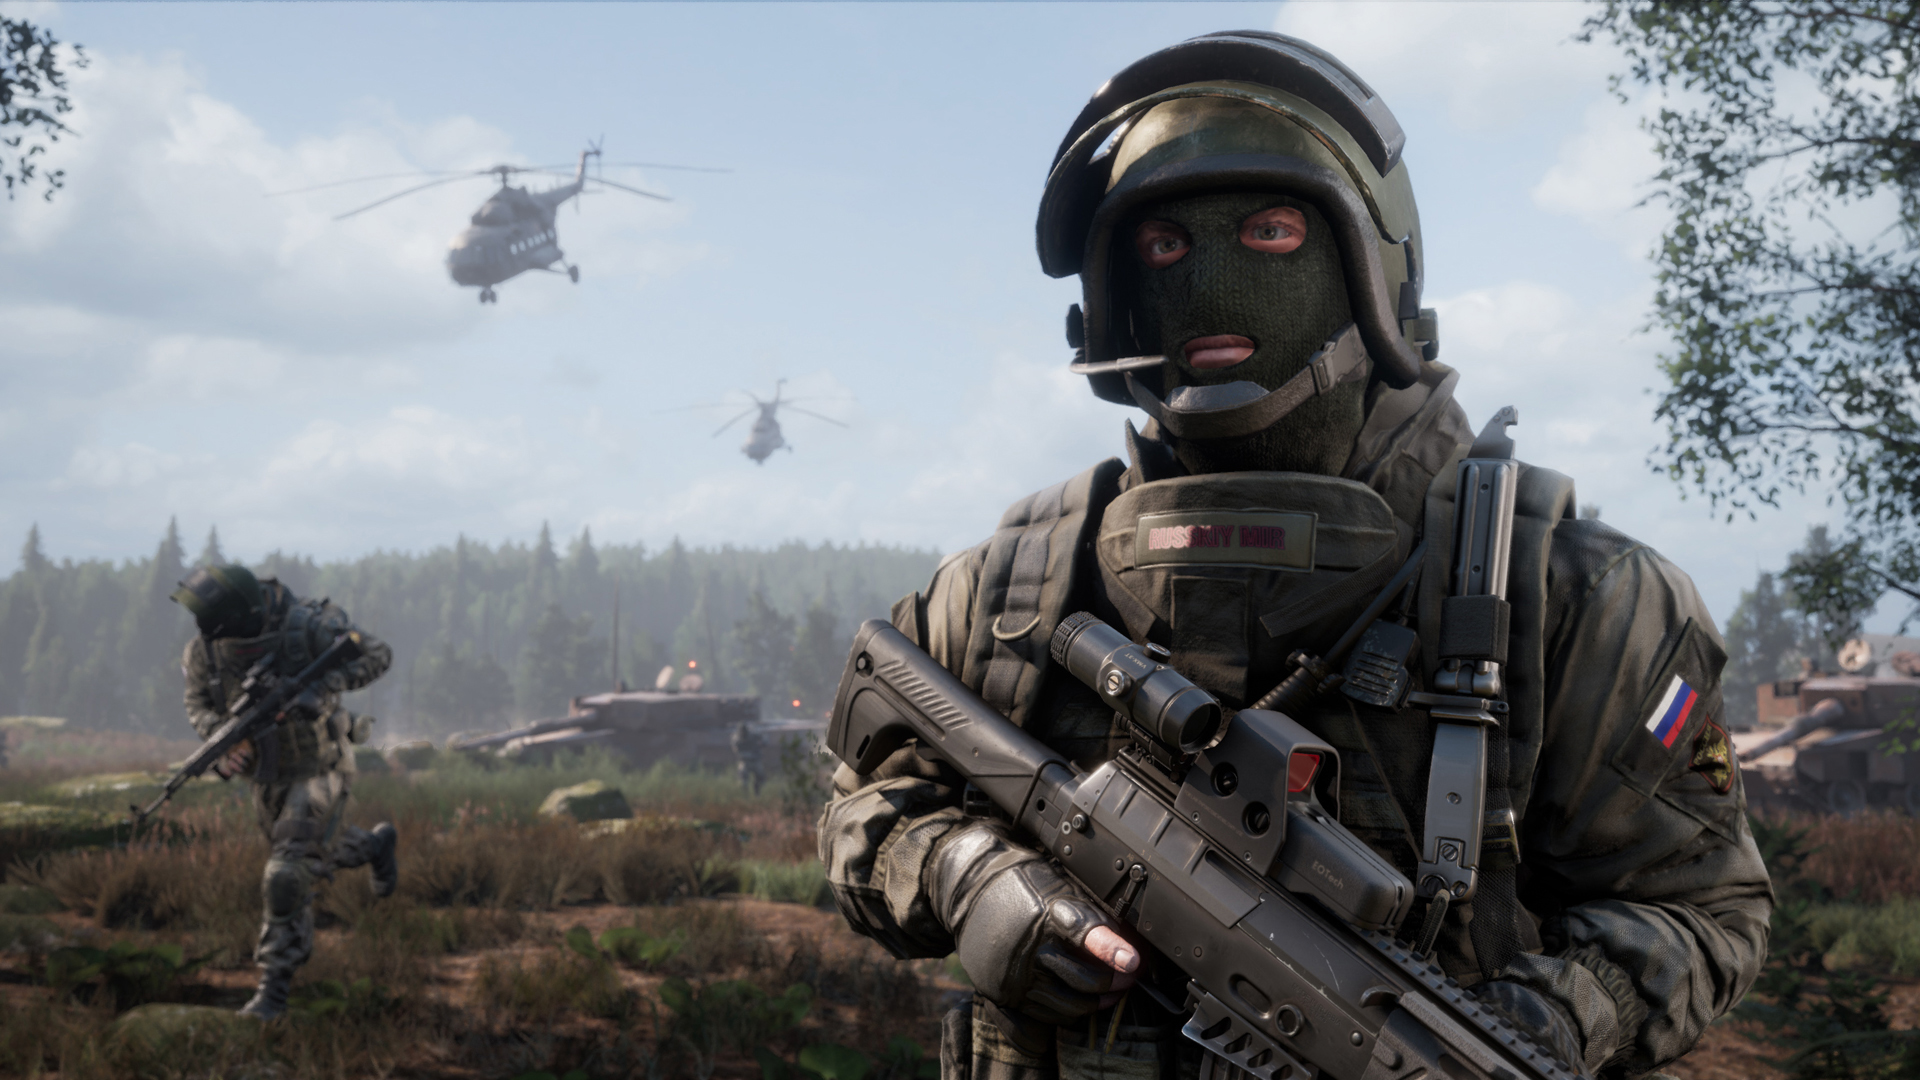 World War 3 devs find it “hard to put in words how sorry we are” | PCGamesN